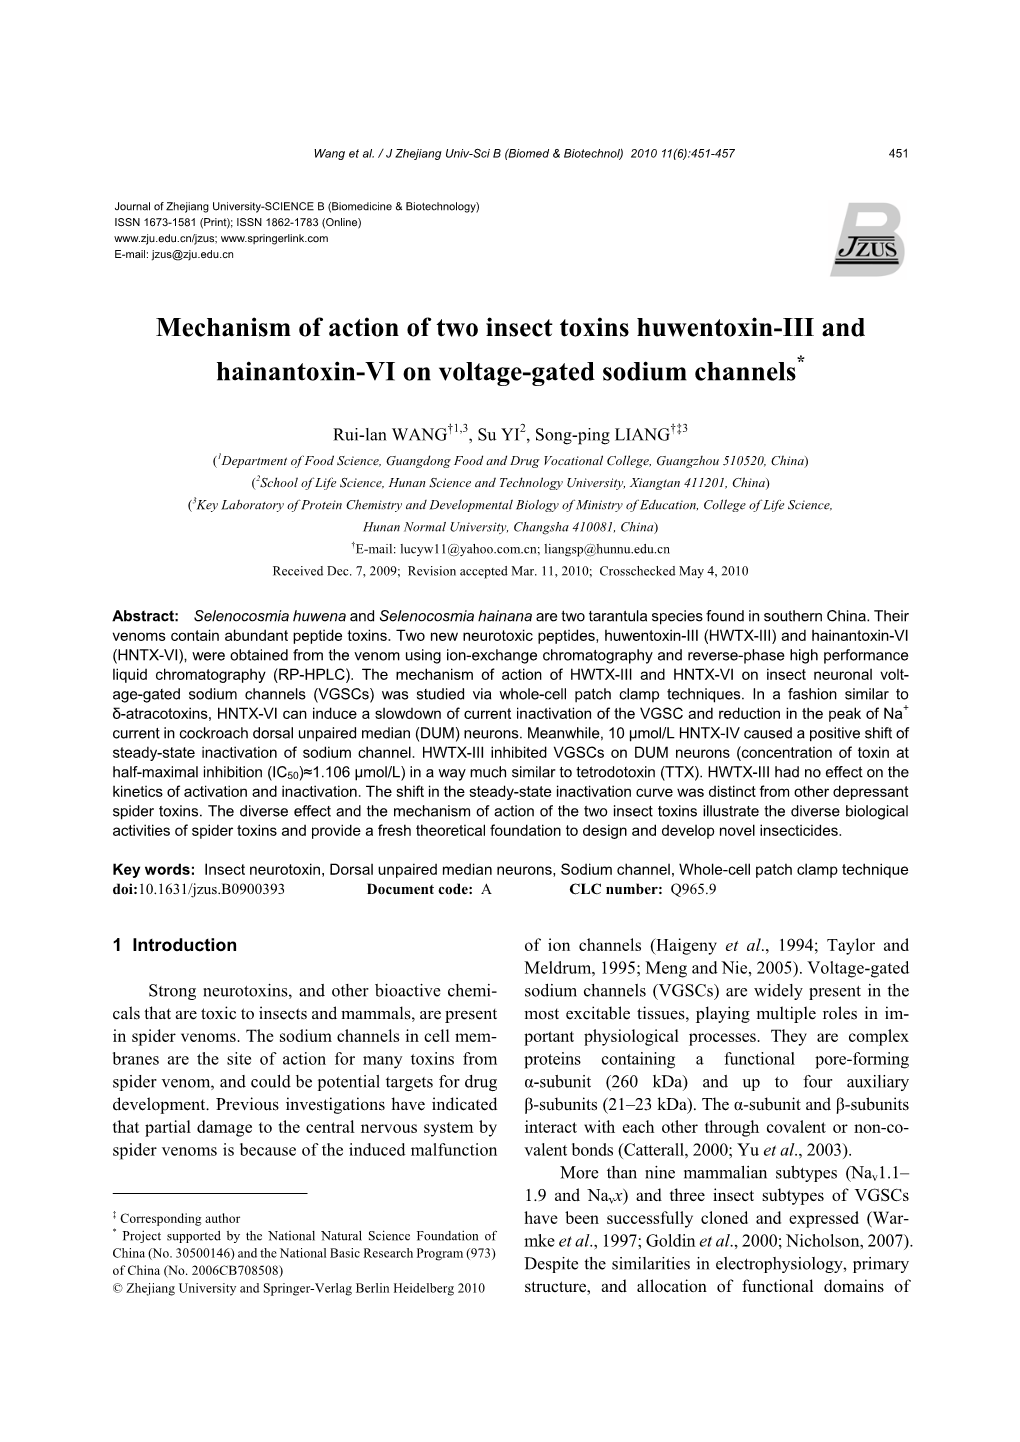 Mechanism of Action of Two Insect Toxins Huwentoxin-III and Hainantoxin-VI on Voltage-Gated Sodium Channels*